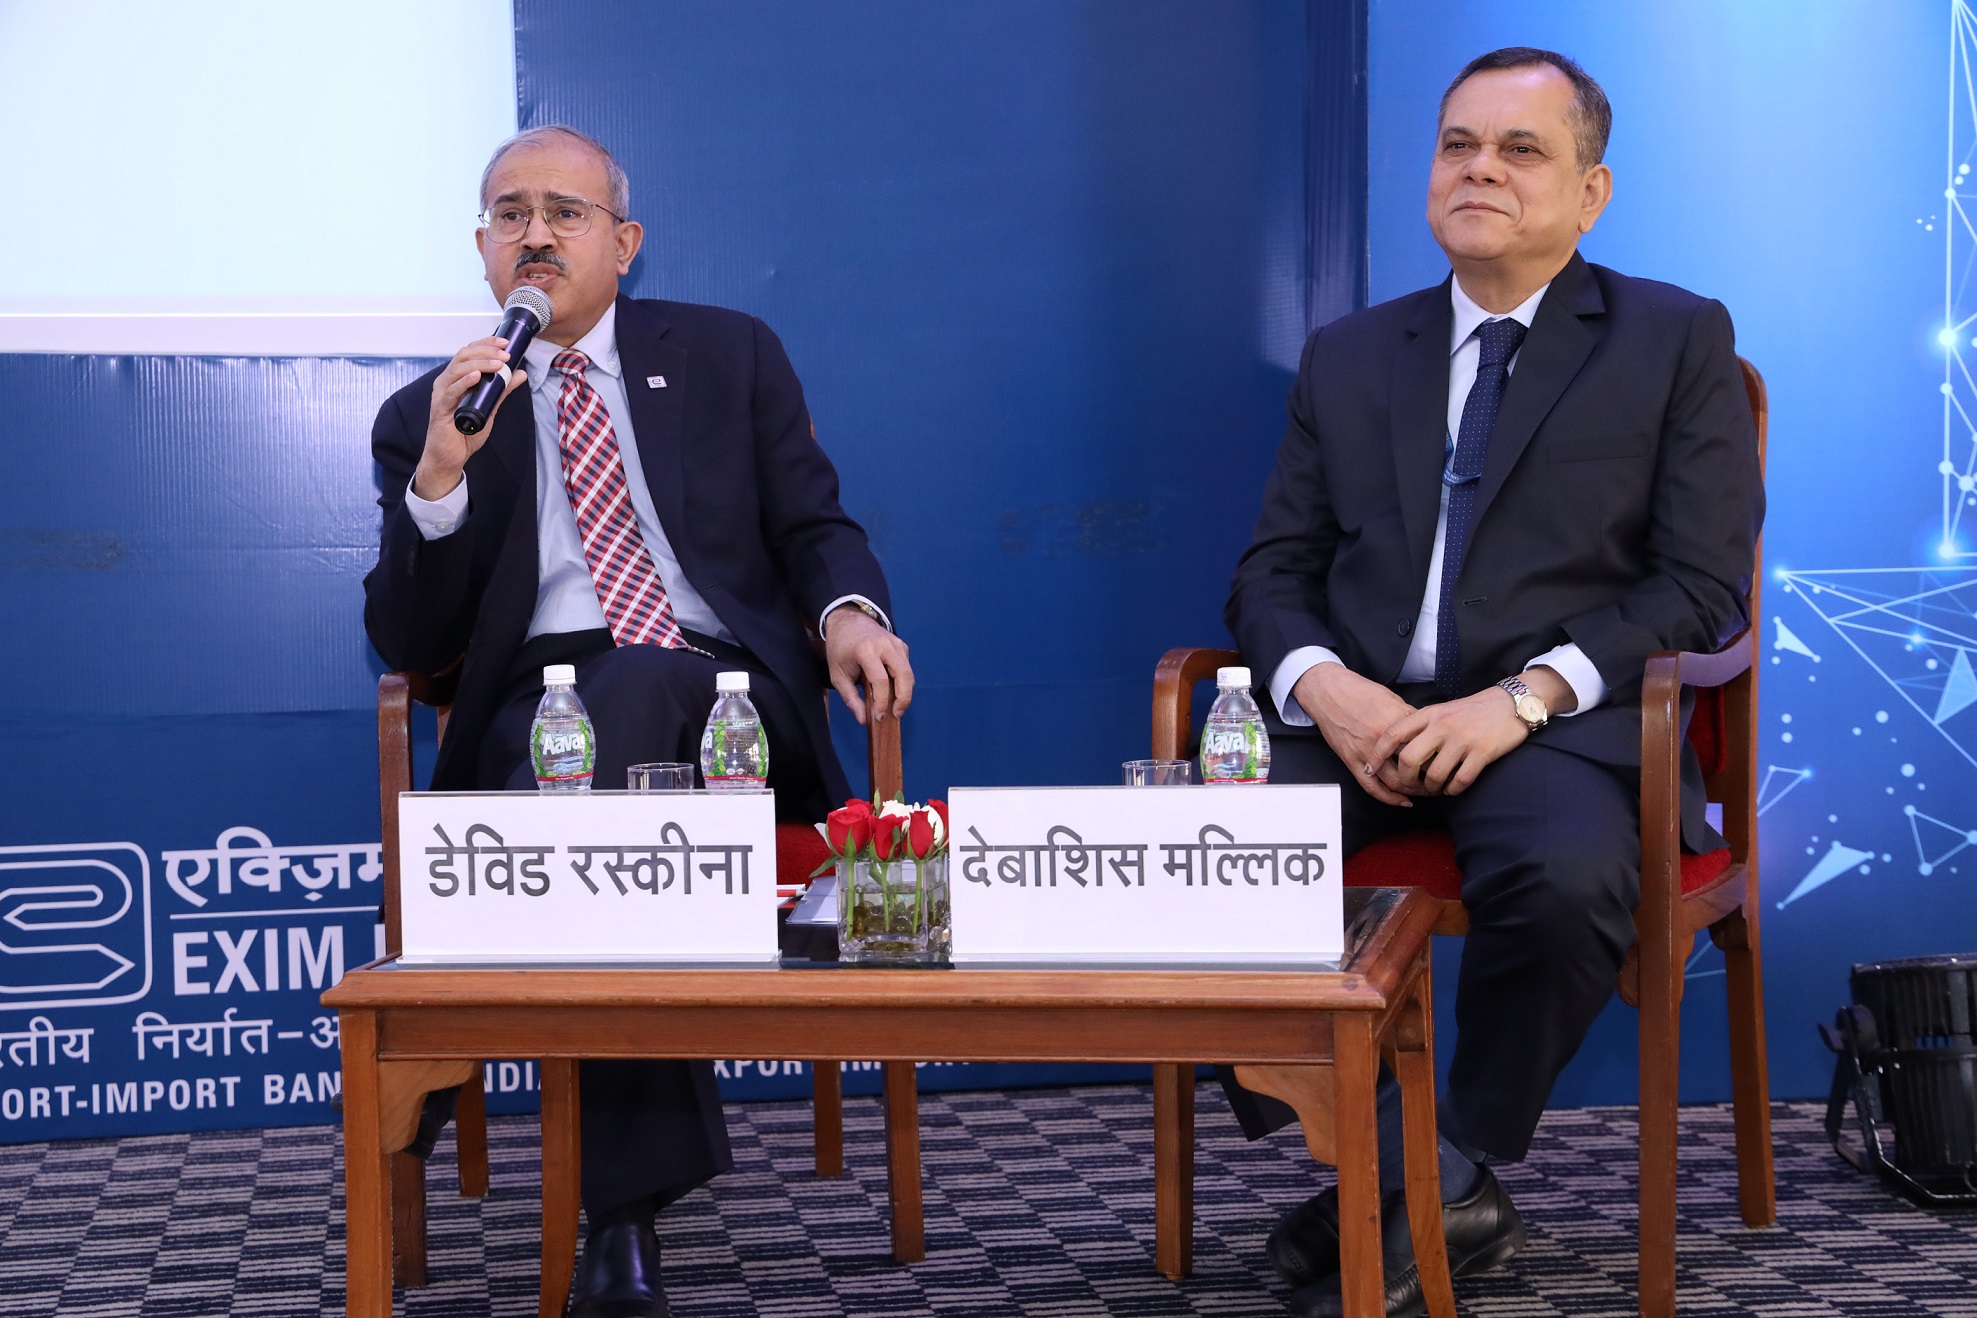 (L-R) Mr. David Rasquinha, Managing Director and Mr. Debasish Mallick, Deputy Managing Director, Export-Import Bank of India (Exim Bank), announced the Bank’s results for the financial year 2018-19 at a press conference in Mumbai.